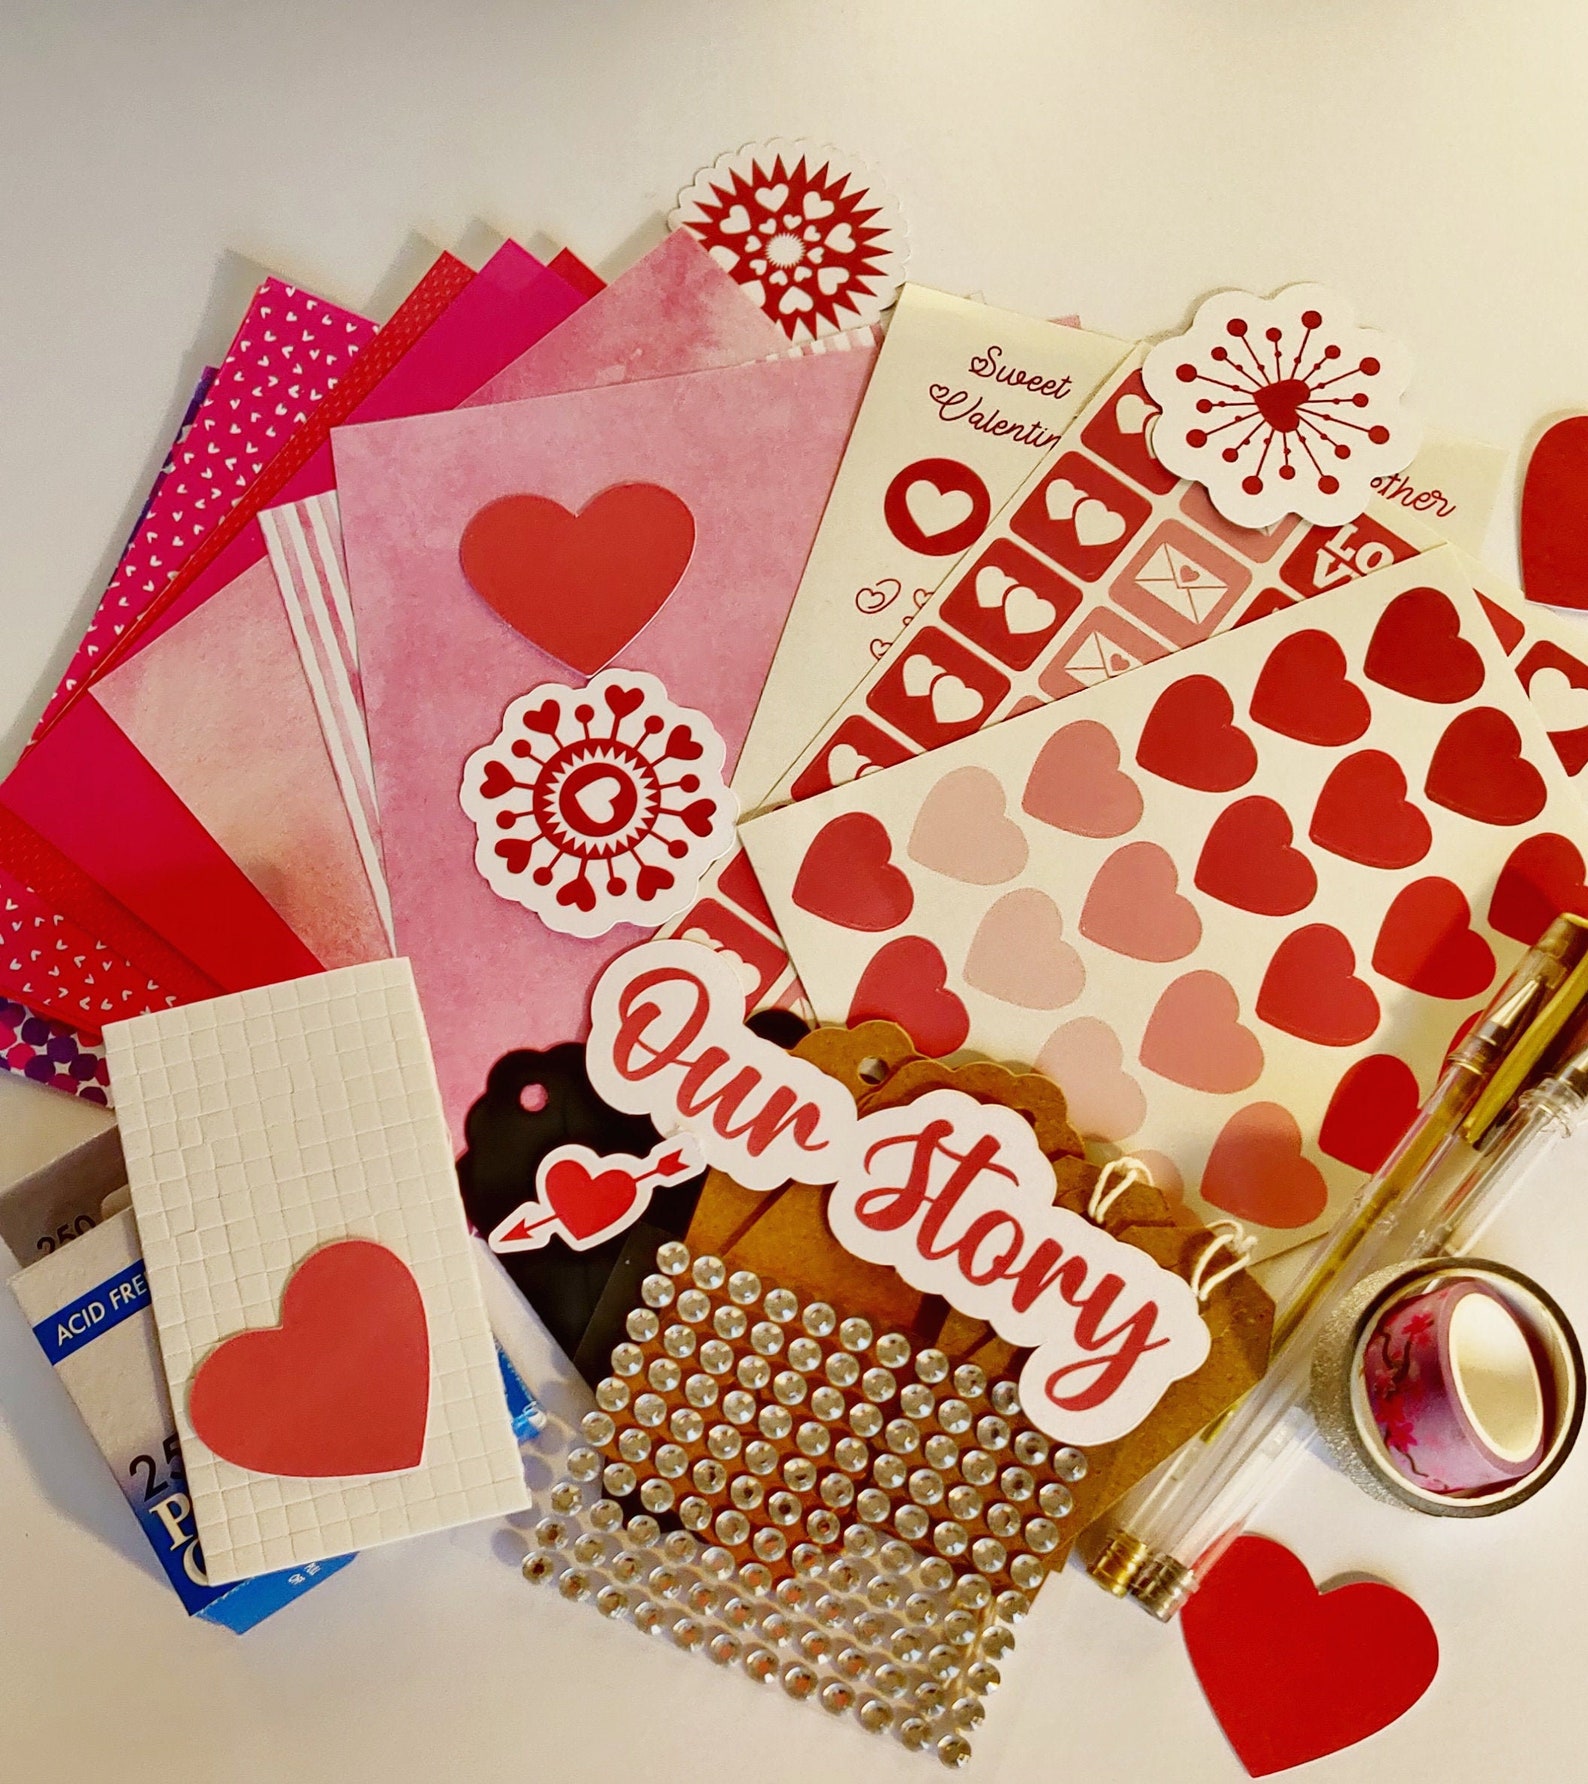 13 Cute and Creative DIY Valentine's Day Gift Ideas for Him